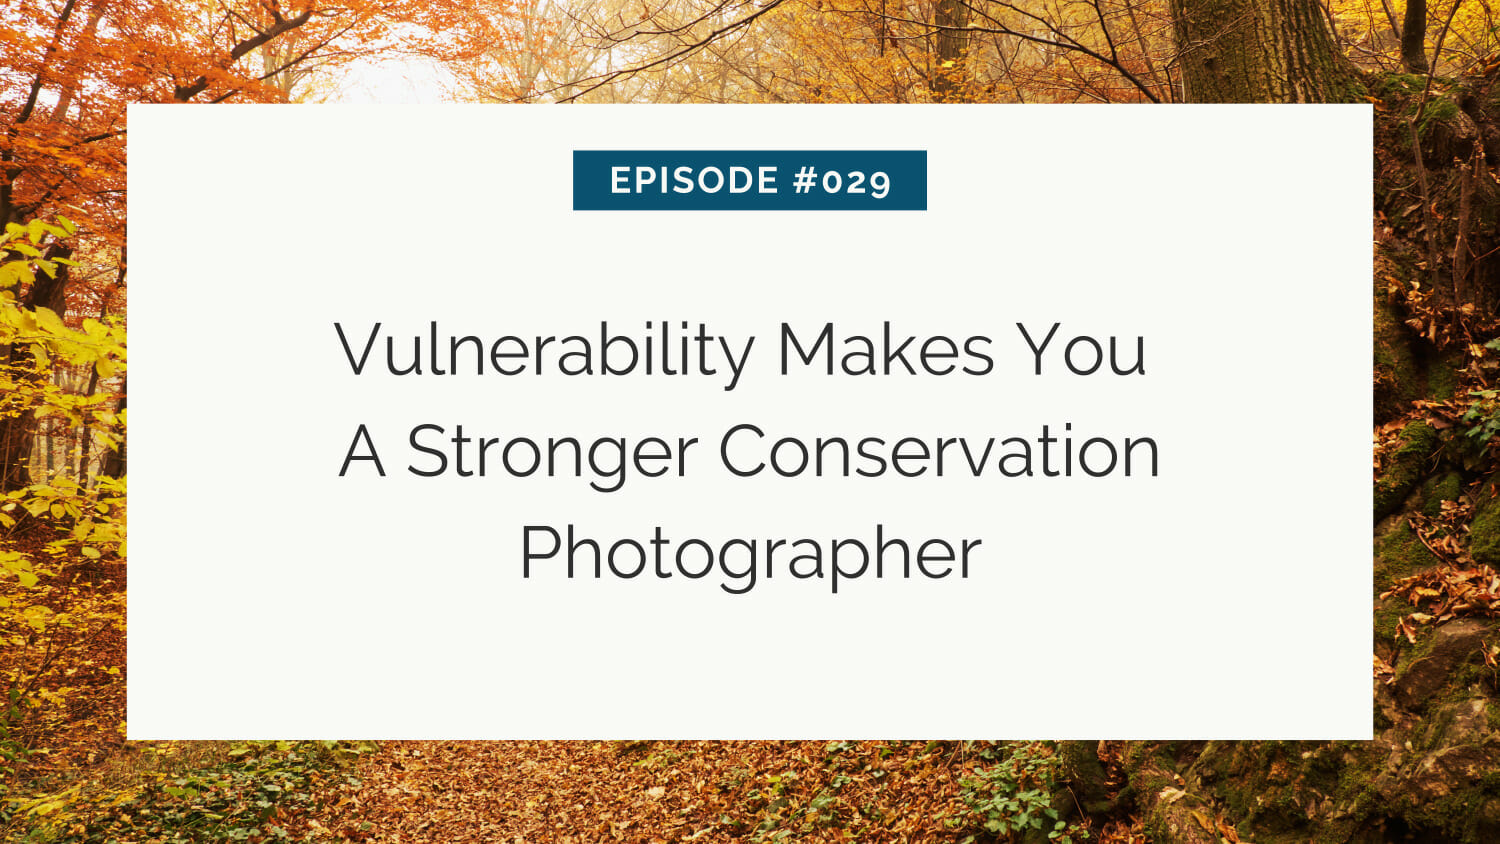 Slide from a presentation titled "episode #029: vulnerability makes you a stronger conservation photographer" against an autumn forest backdrop.